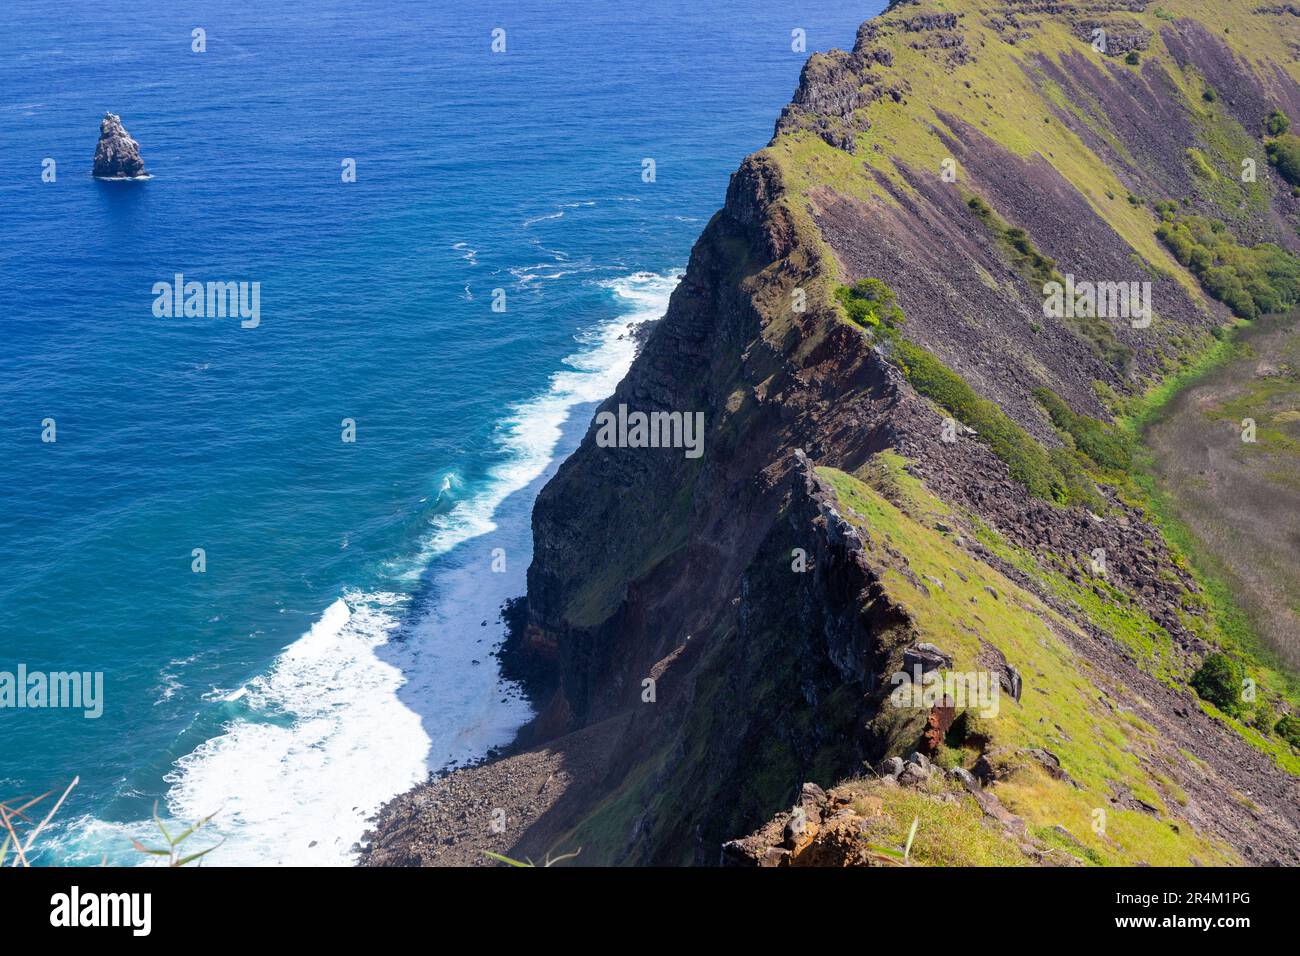 Aerial Landscape View from Above of Rano Kau, Extinct Volcano Crater and Pacific Ocean Coastline, Easter Island Rapa Nui, Chile Stock Photo